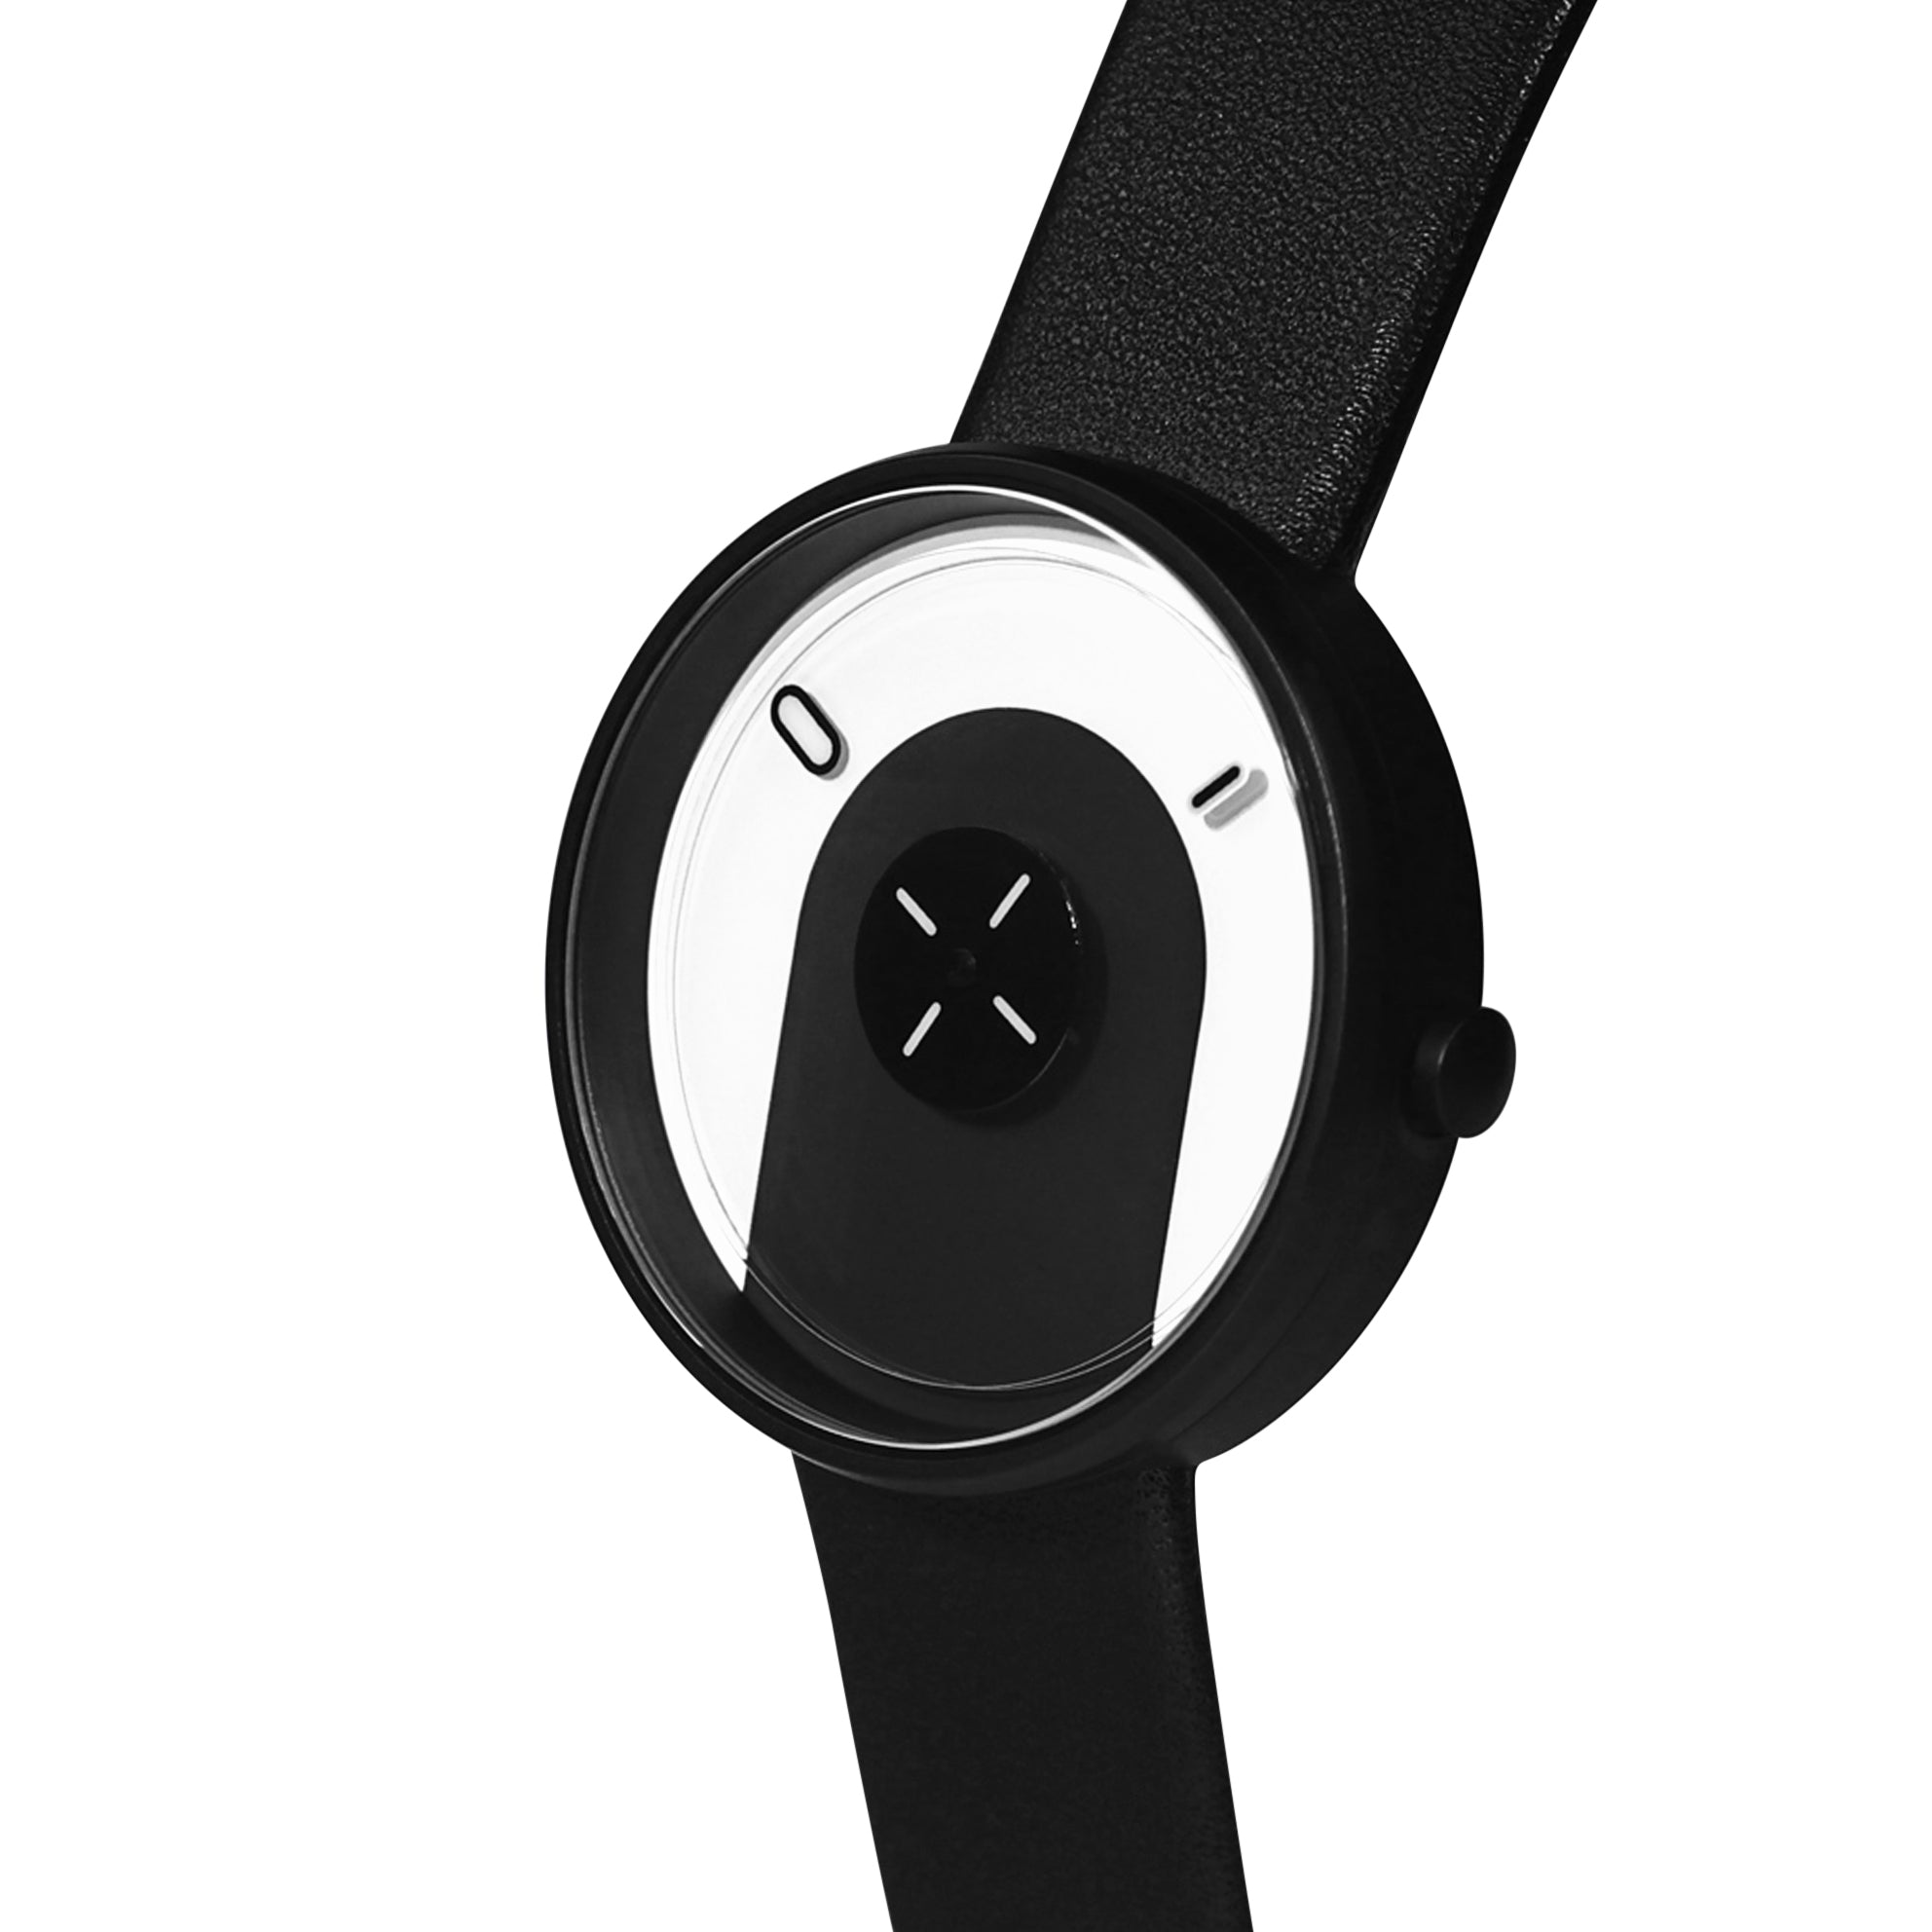 How do I overlap rings like the the Apple Watch Activity App? (Reference &  Render image added) : r/blender